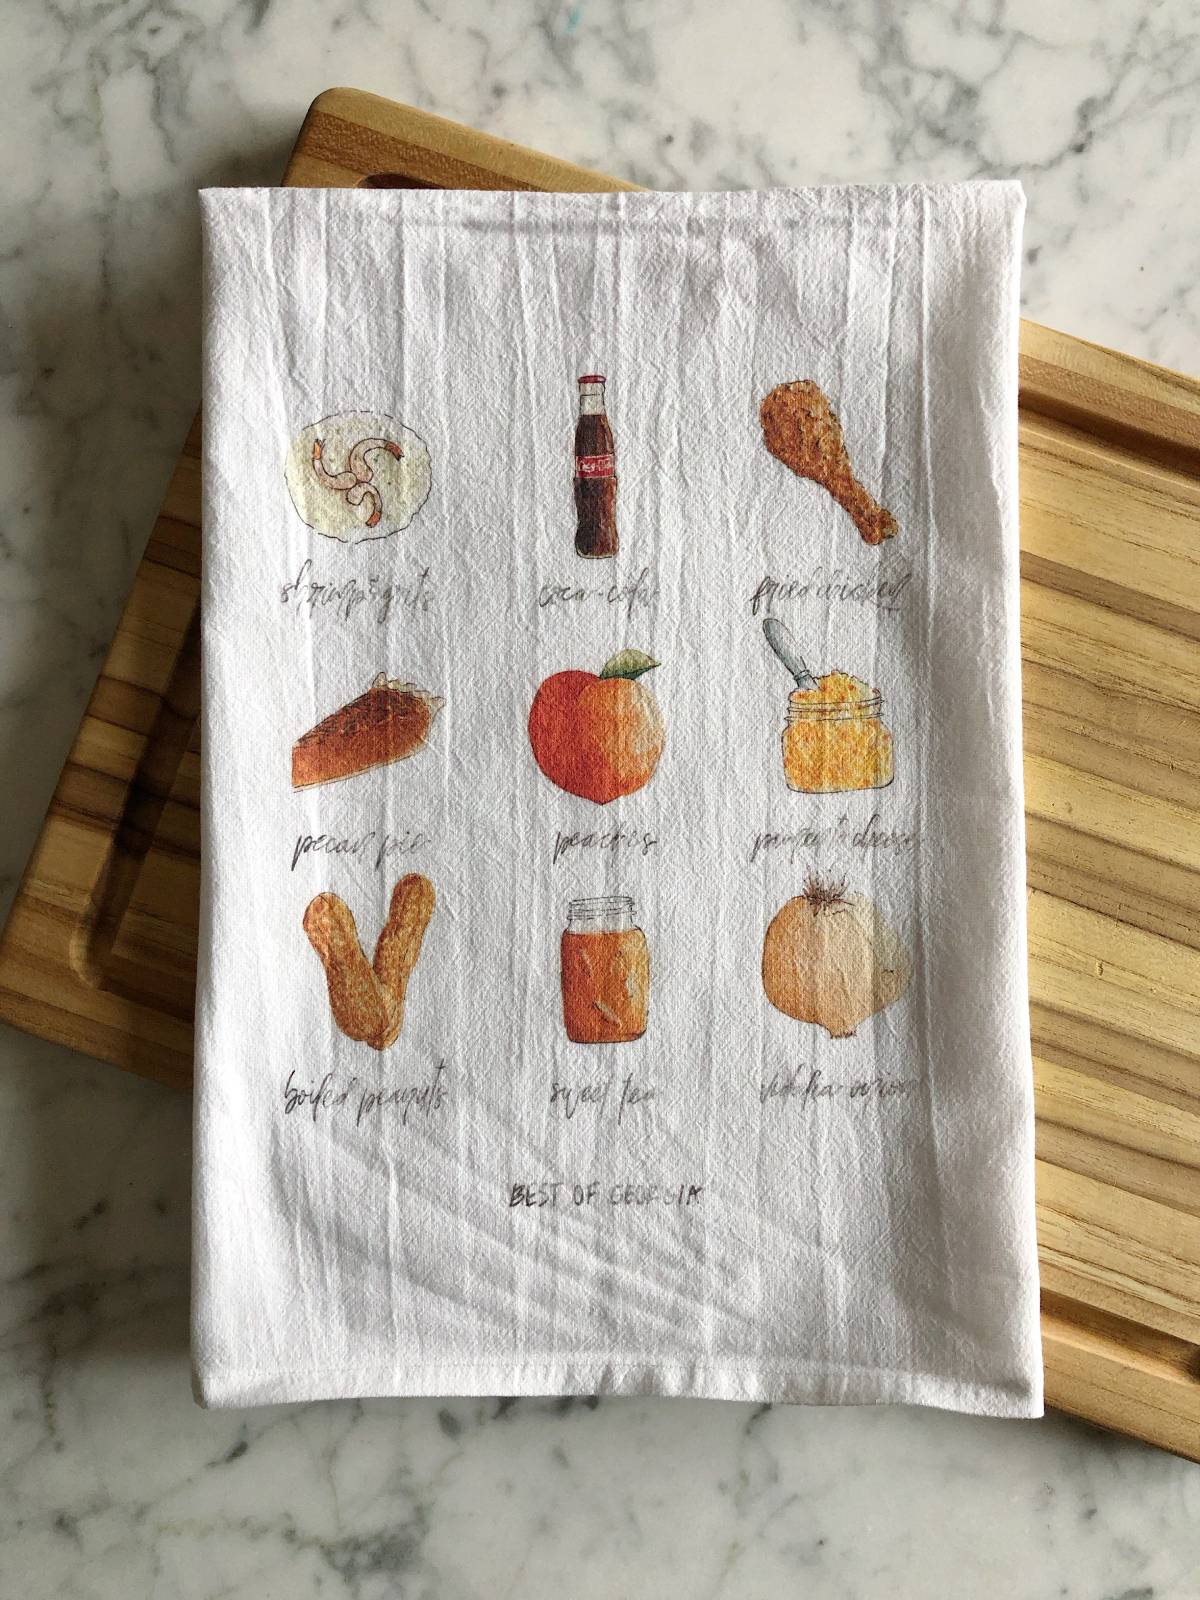 A white tea towel displaying 9 popular types of foods and drinks from the state of Georgia